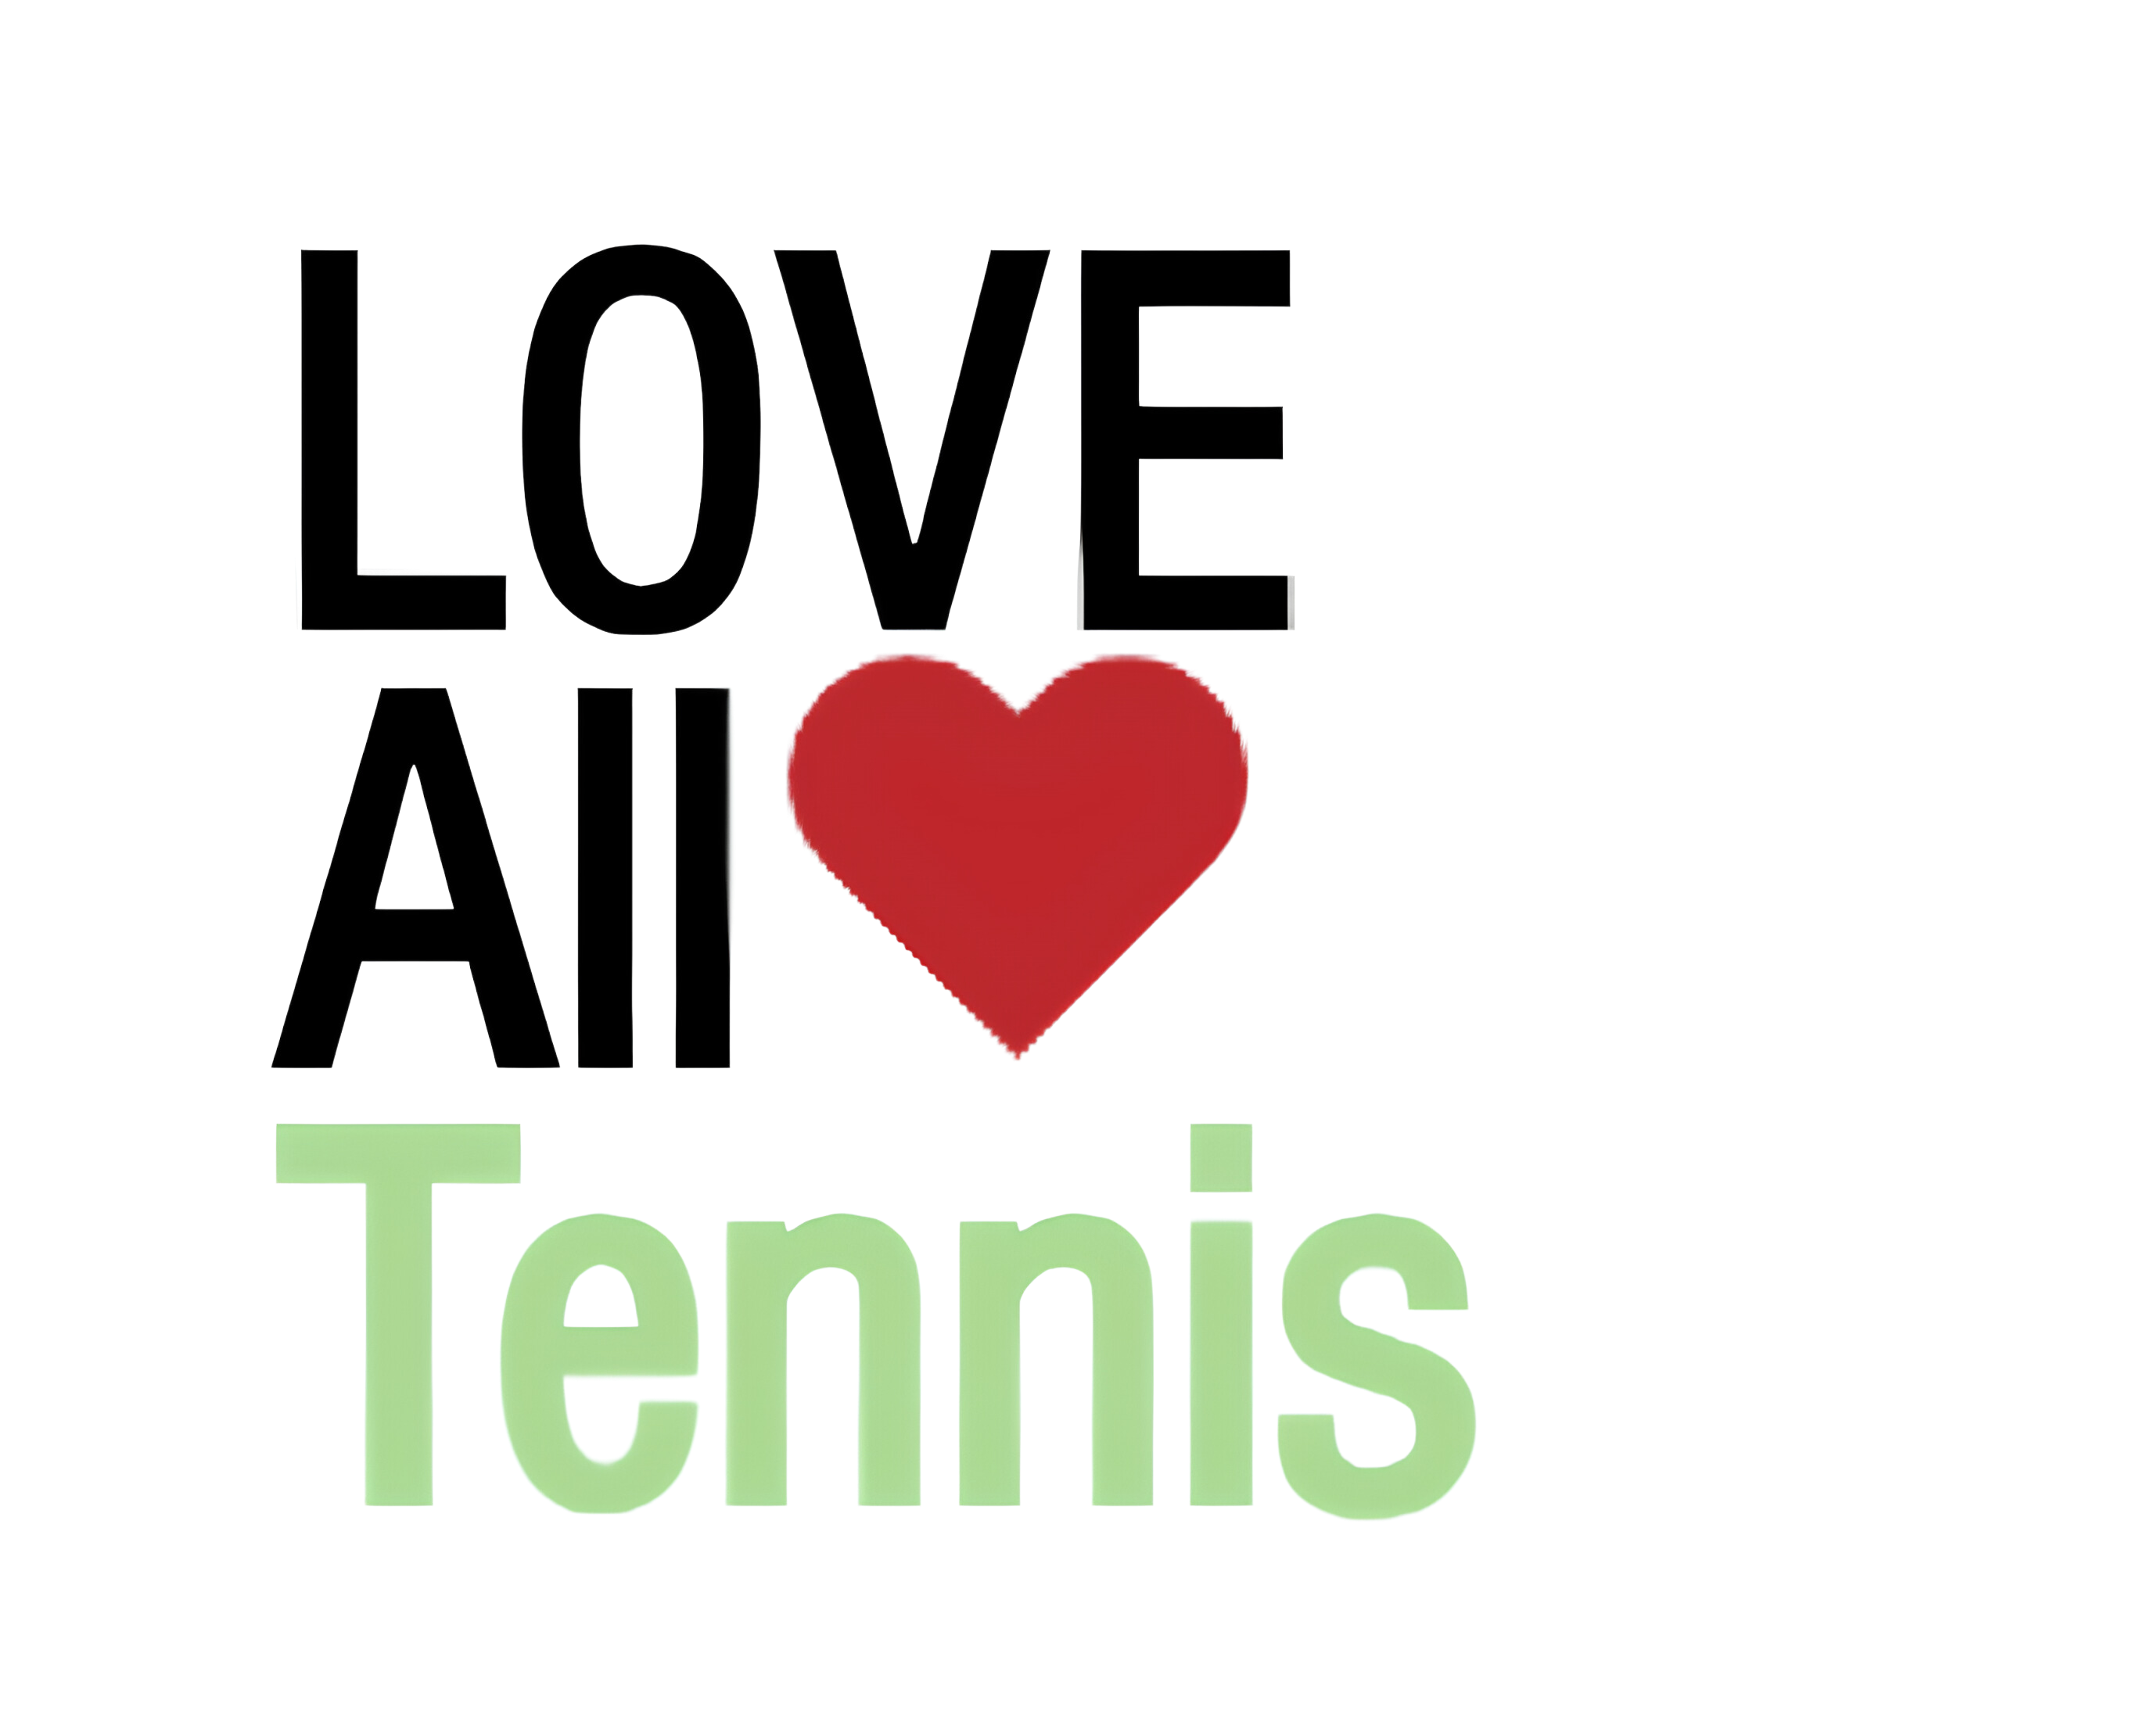 Image 1 of 9 of Love All Tennis - Lincoln Terrace Park court